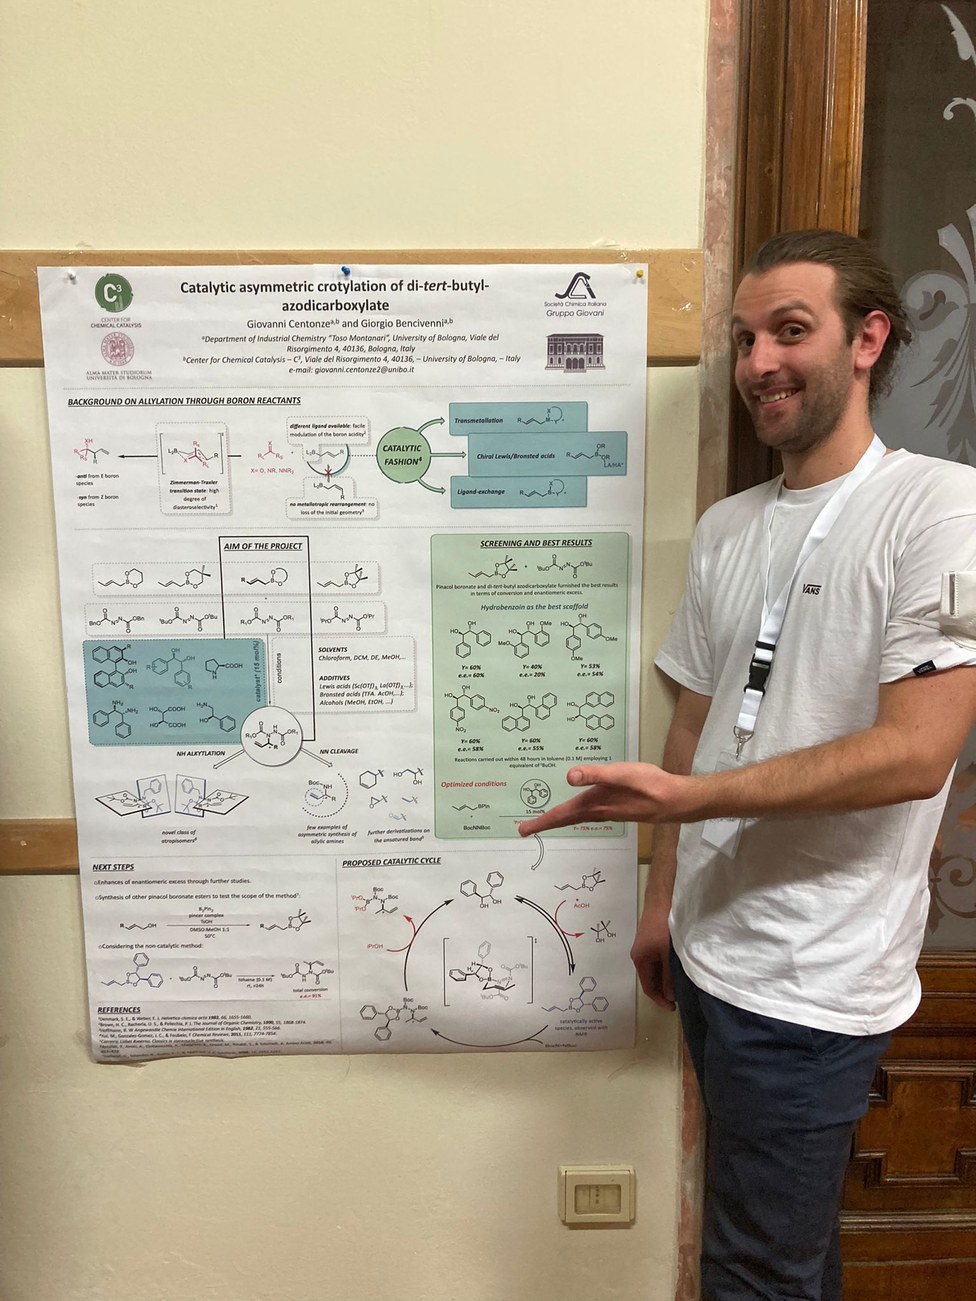 Giovanni and his poster session in Gargnano